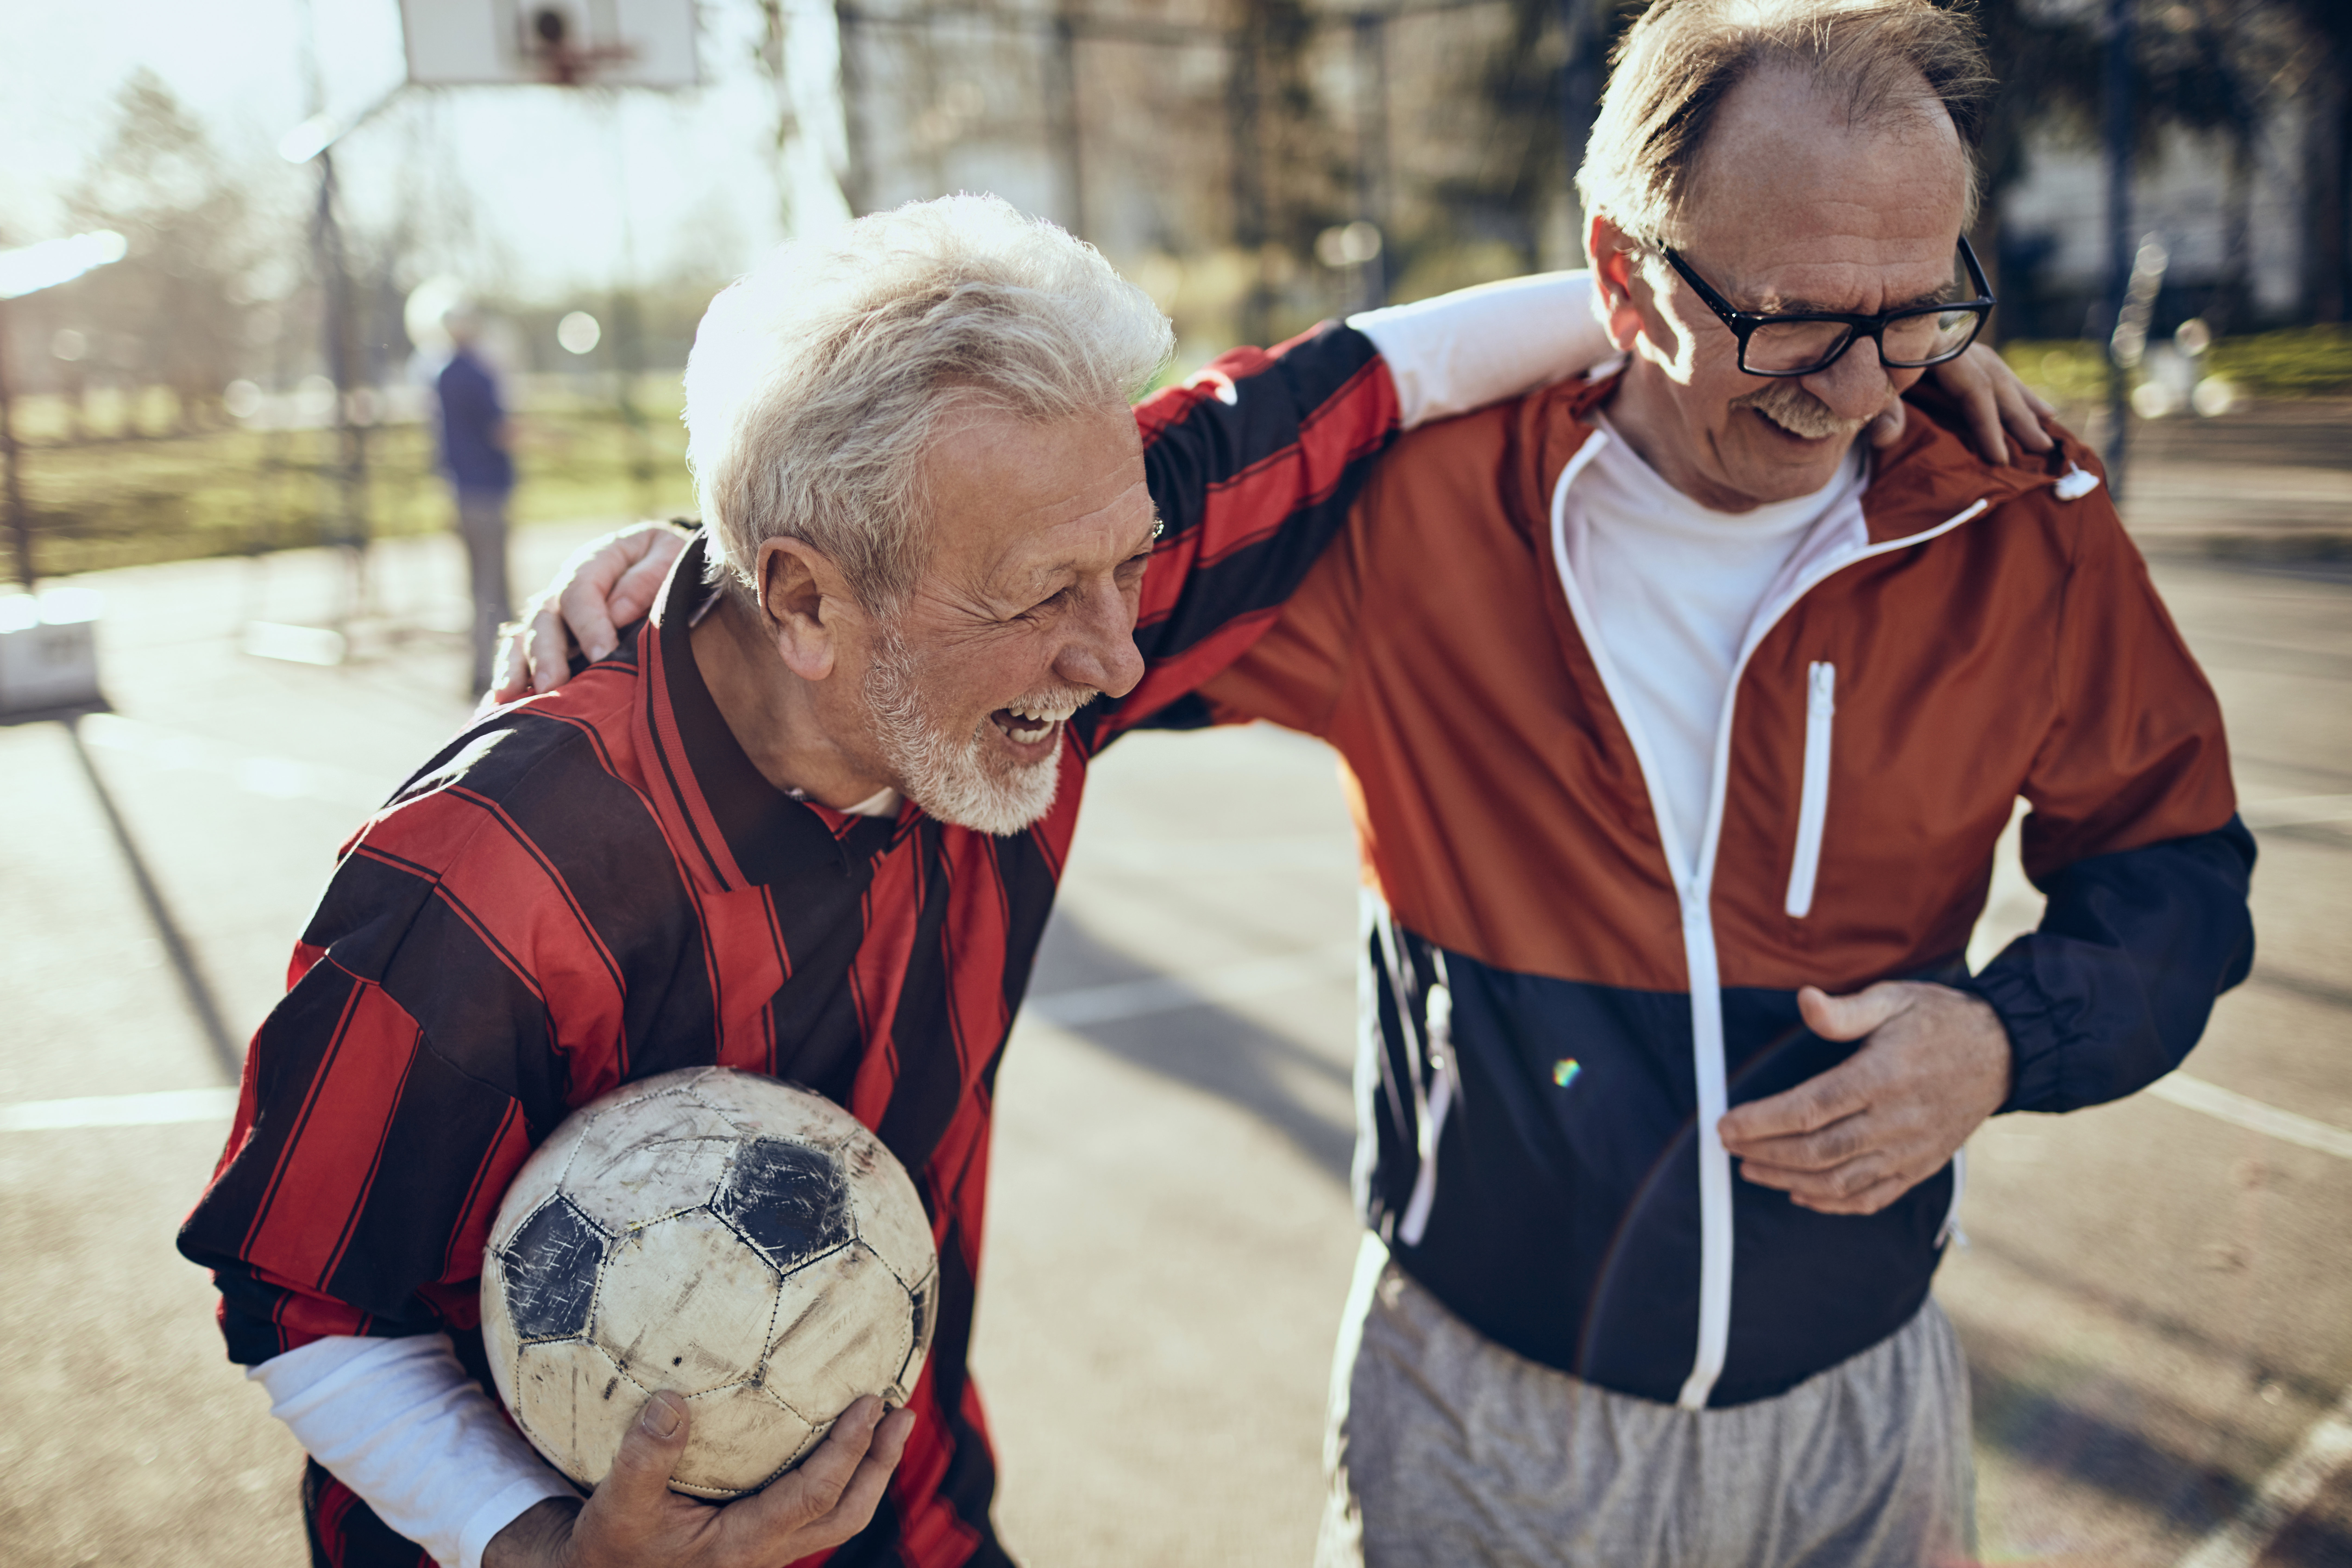 two-men-laughing-with-soccer-ball